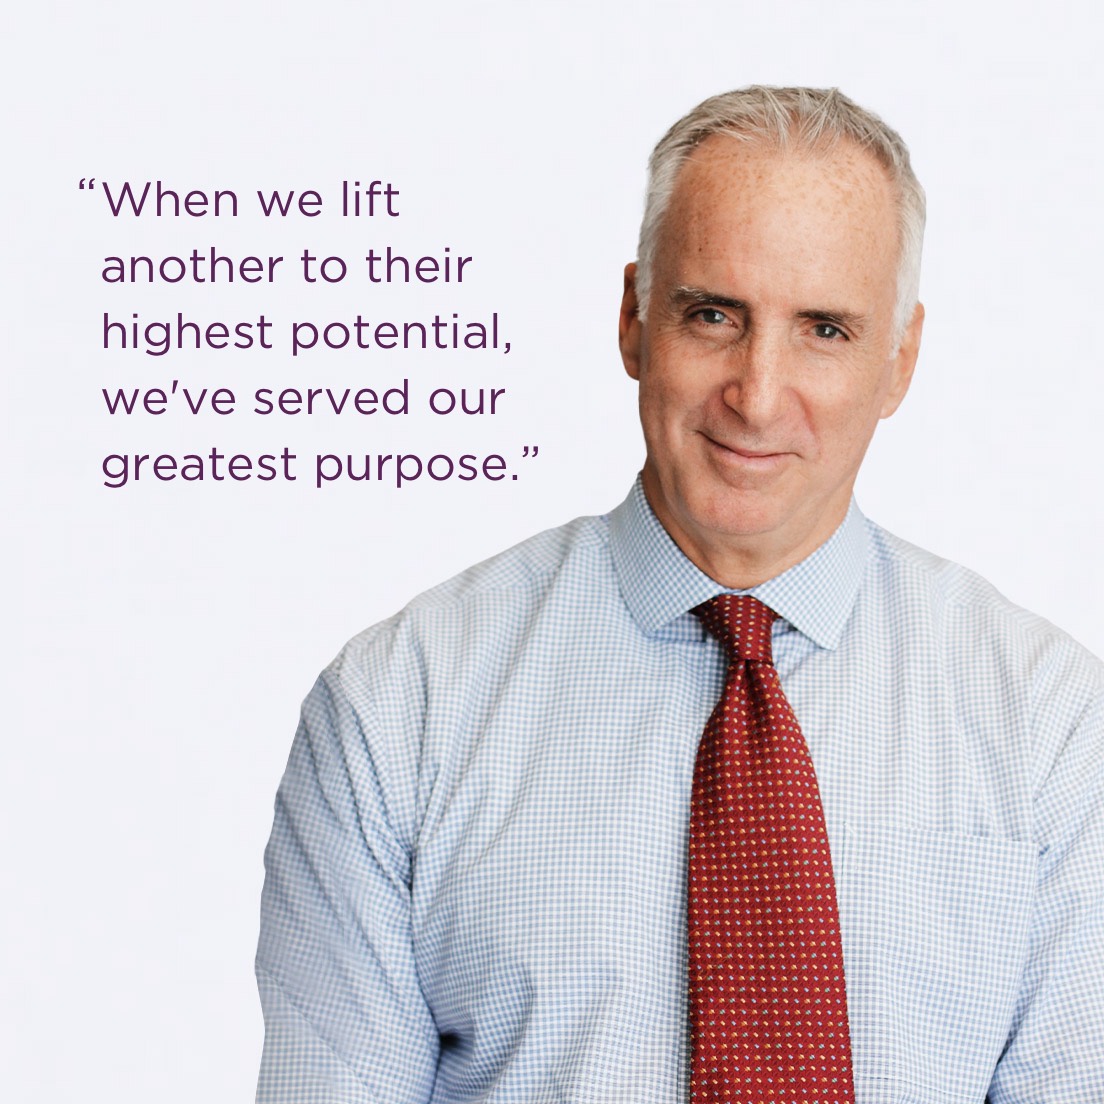 Thomas Mantz - "When we lift another to their highest potential, we've served our greatest purpose.”